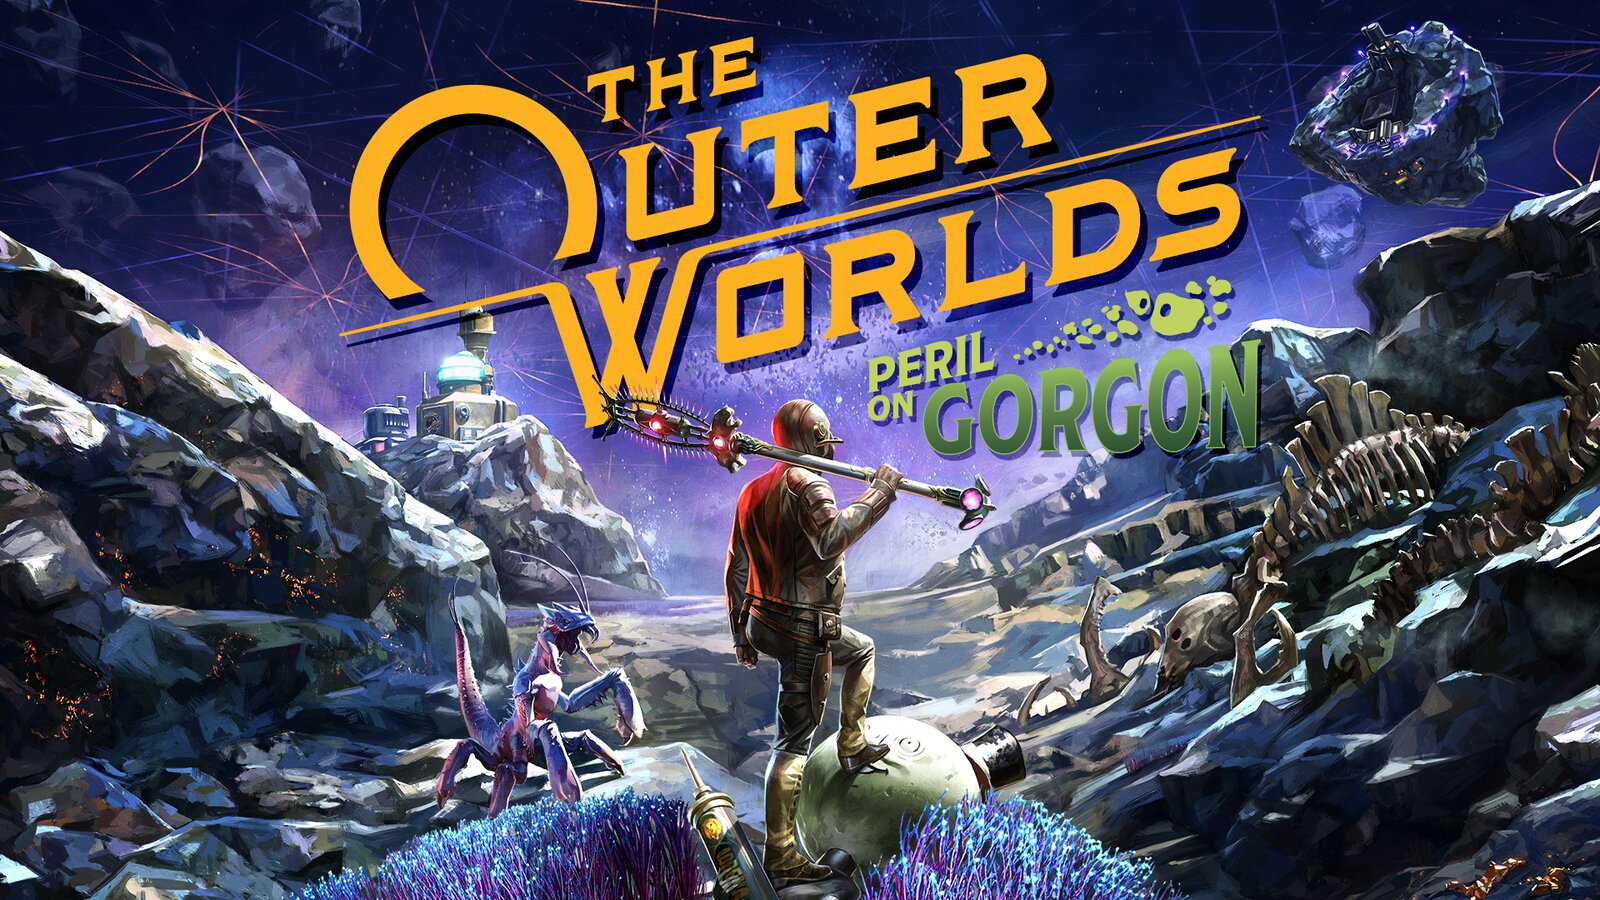 The Outer Worlds - Peril on Gorgon